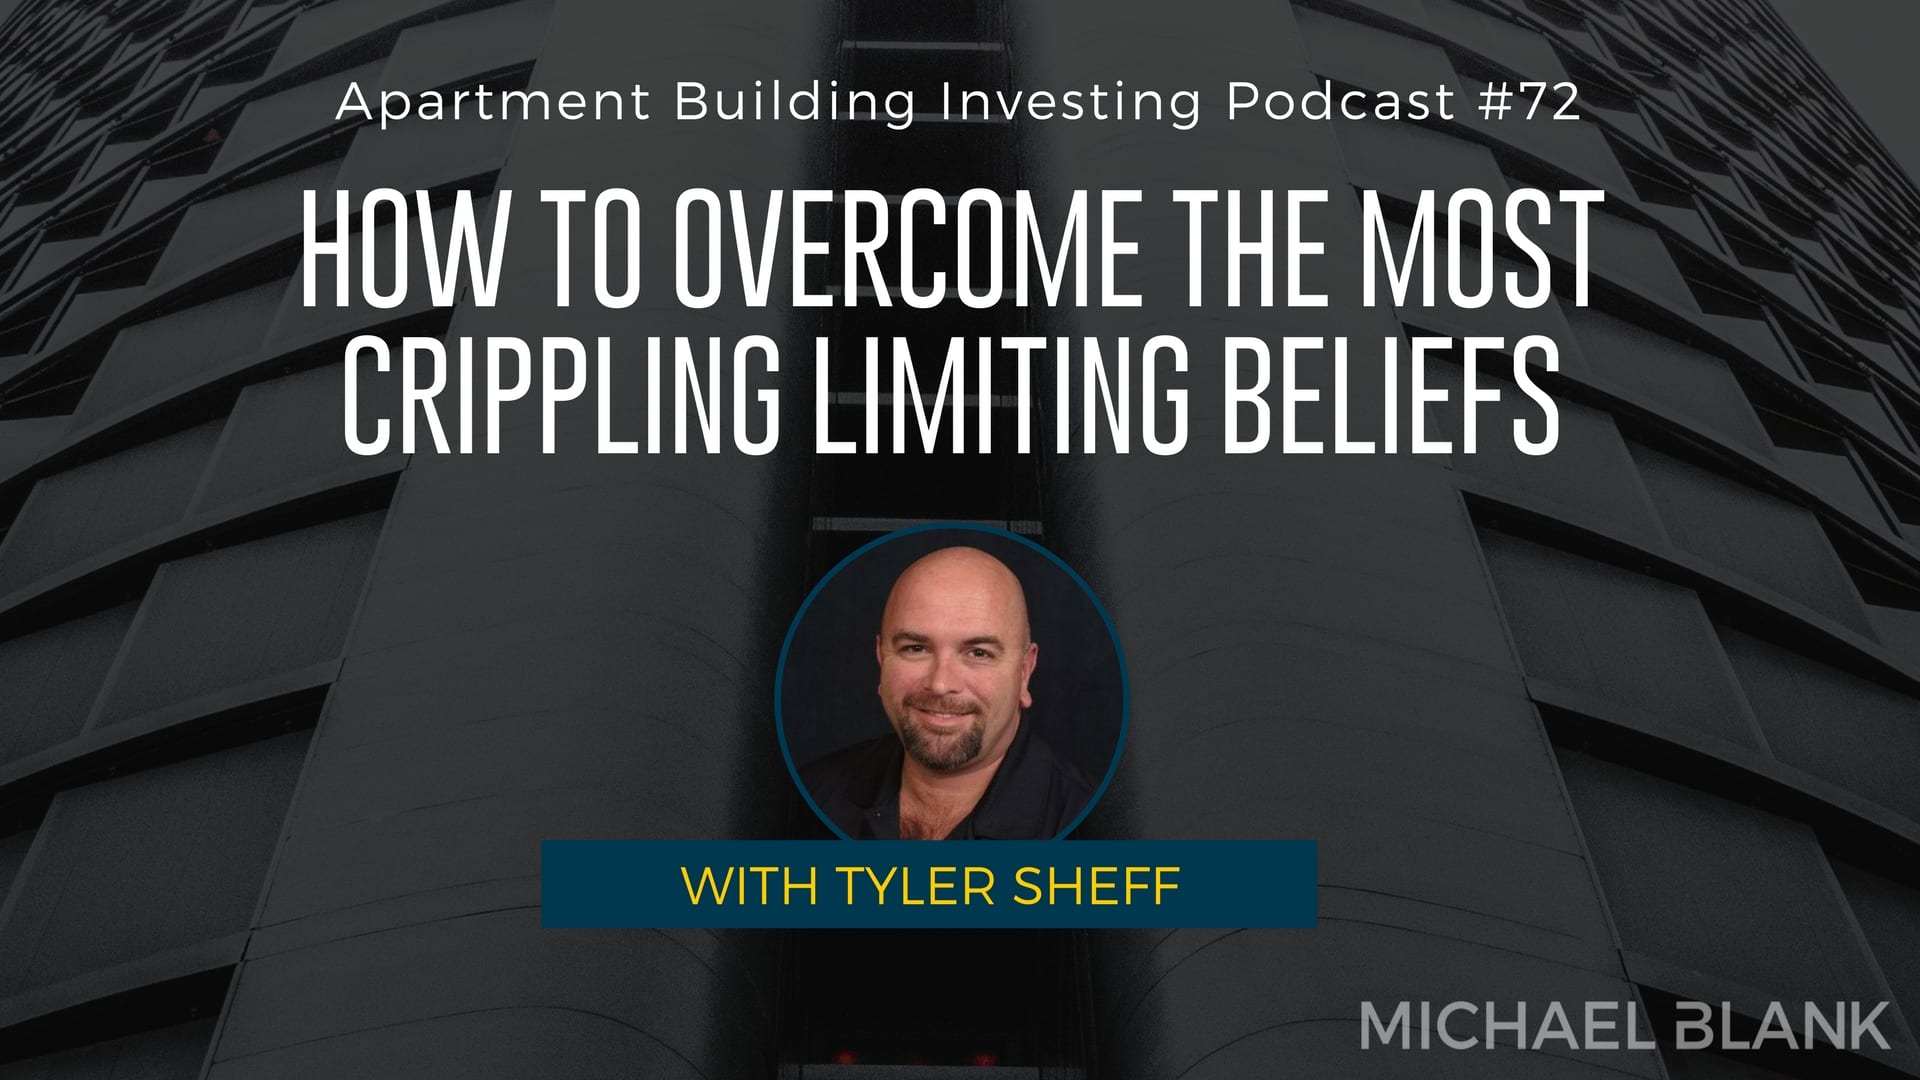 MB 072: How to Overcome the Most Crippling Limiting Beliefs – With Tyler Sheff